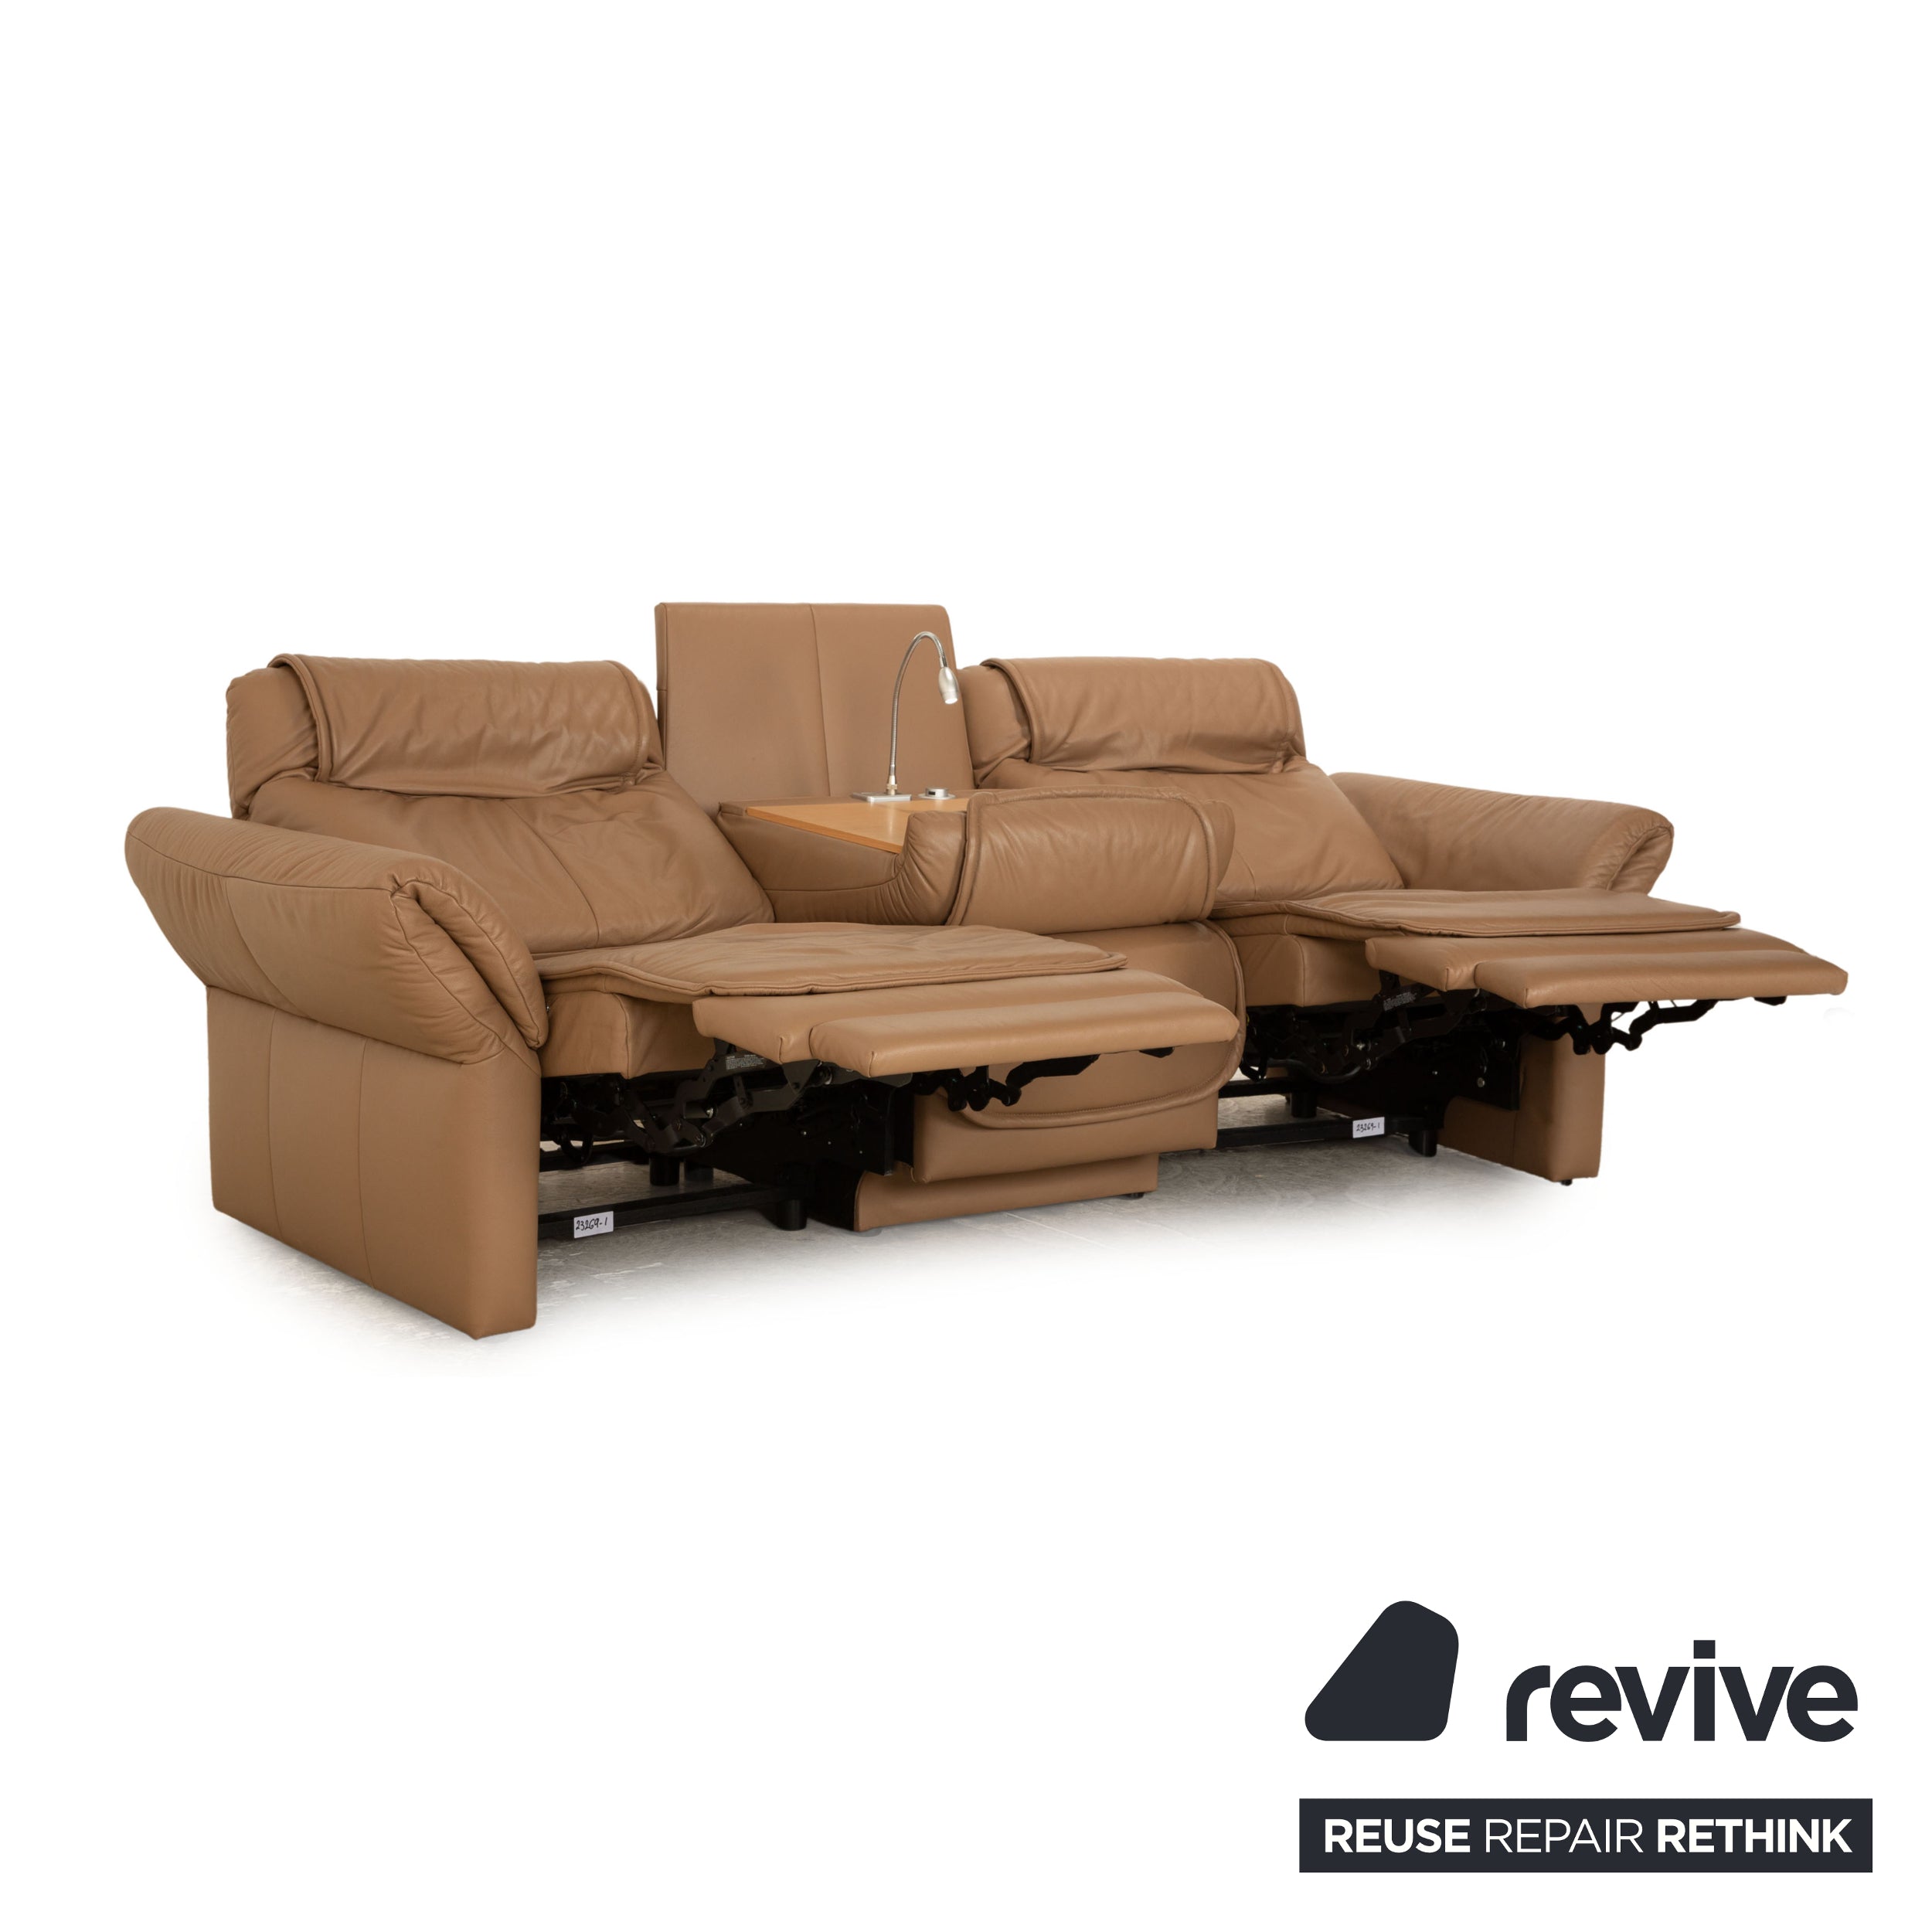 Sample ring MR 380 leather three-seater brown beige electric function sofa couch cinema sofa